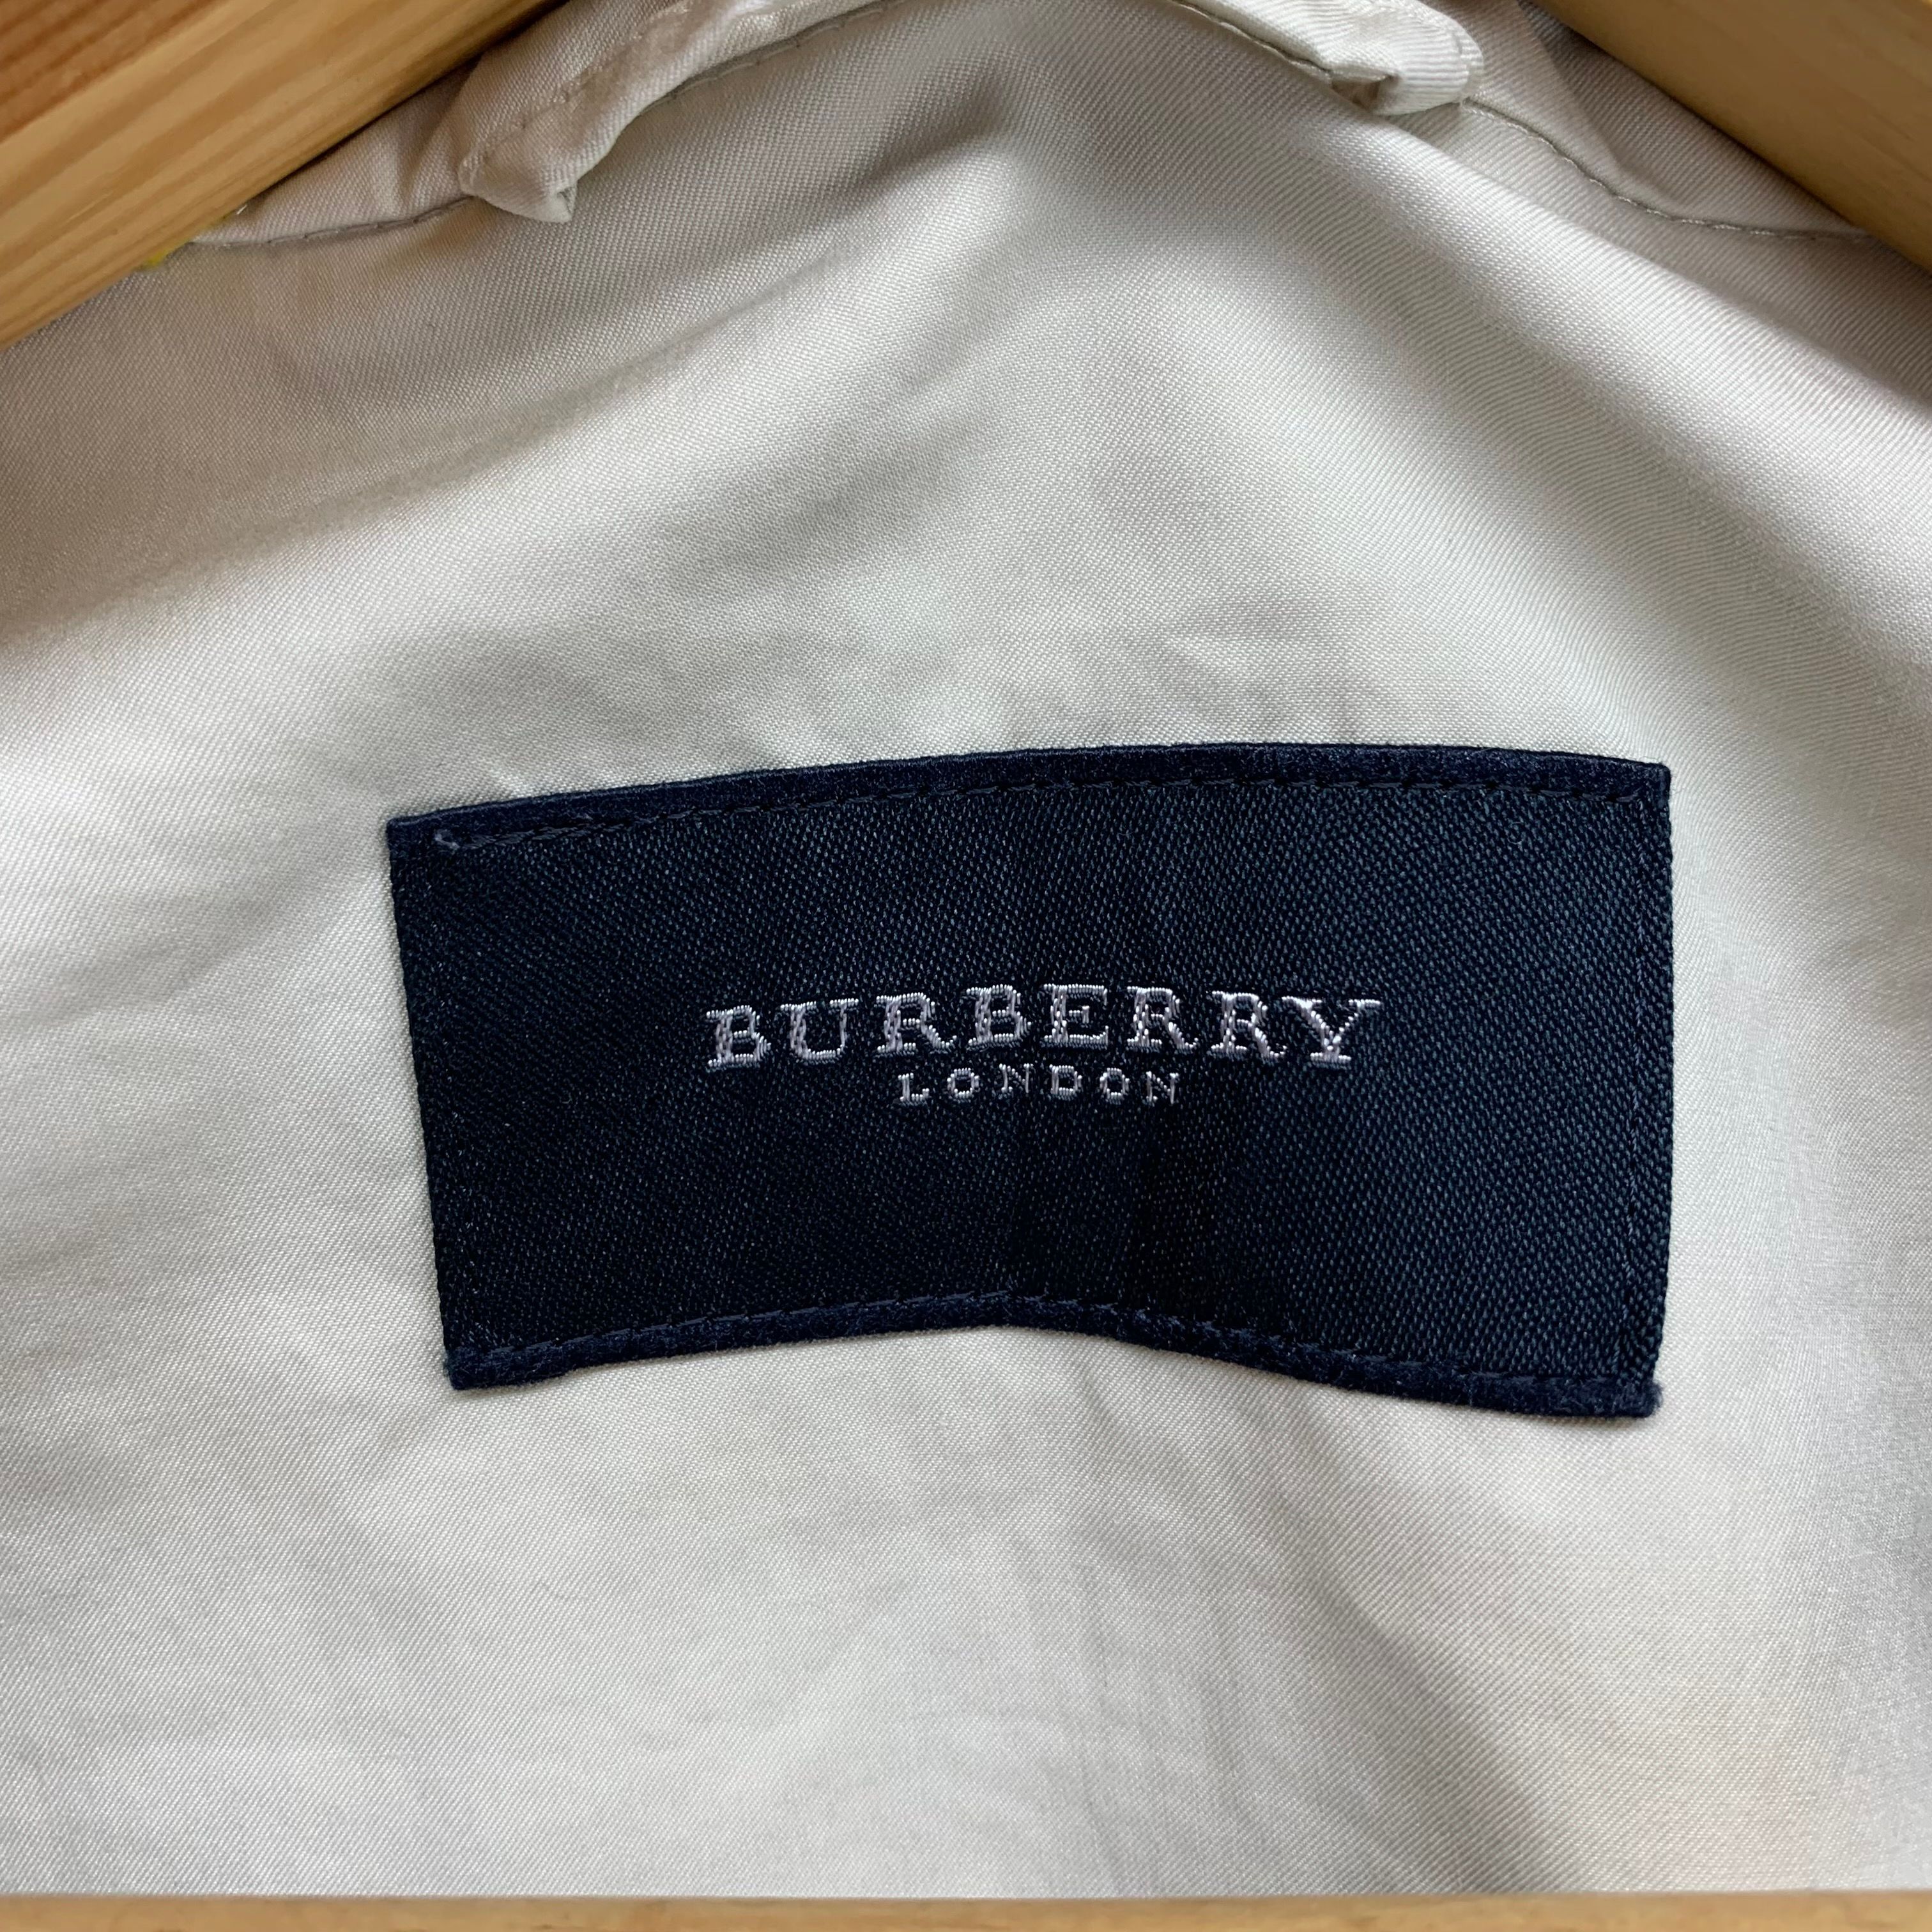 Burberry London Casual Jacket #3280-117 - 8